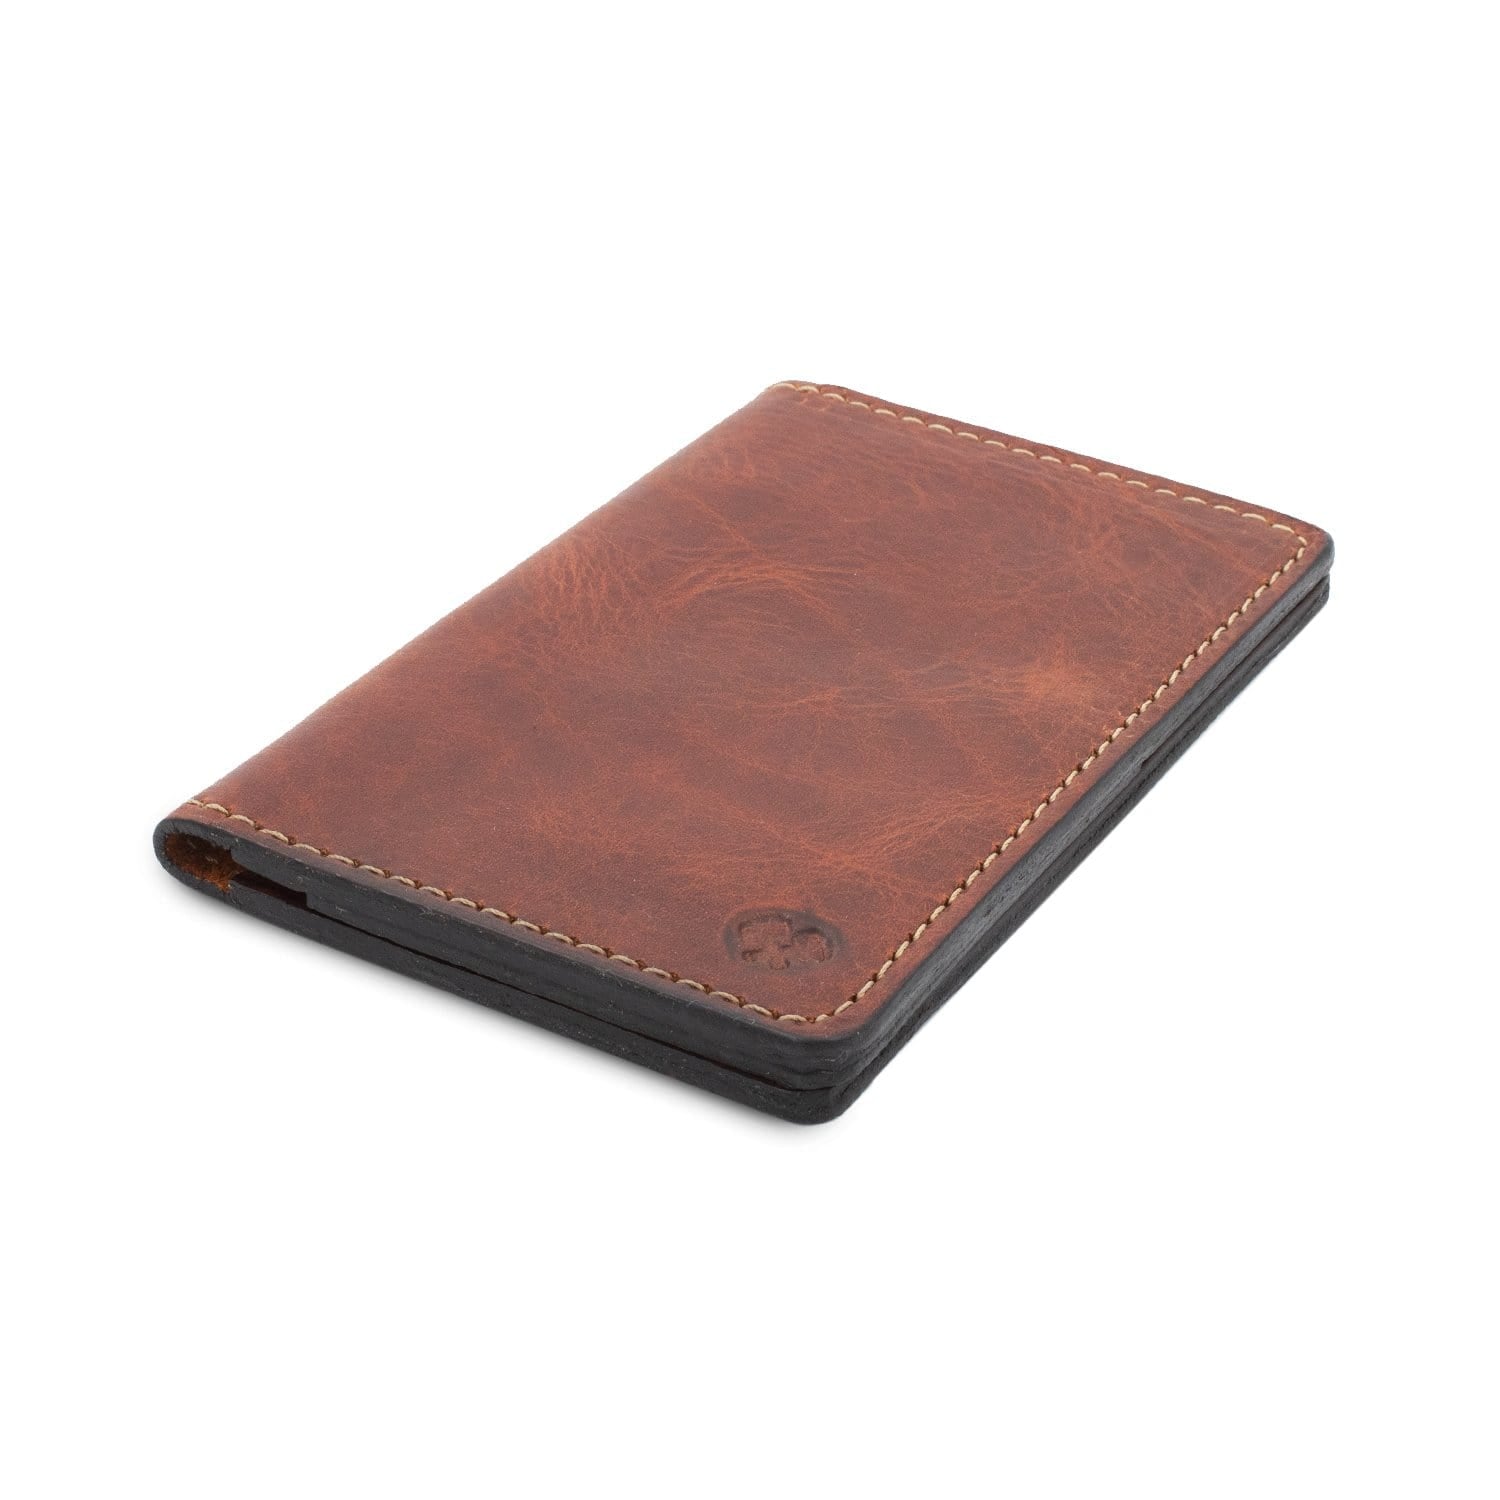 Leather Passport Holder / Field Notes Cover Tobacco Snakebite Brown